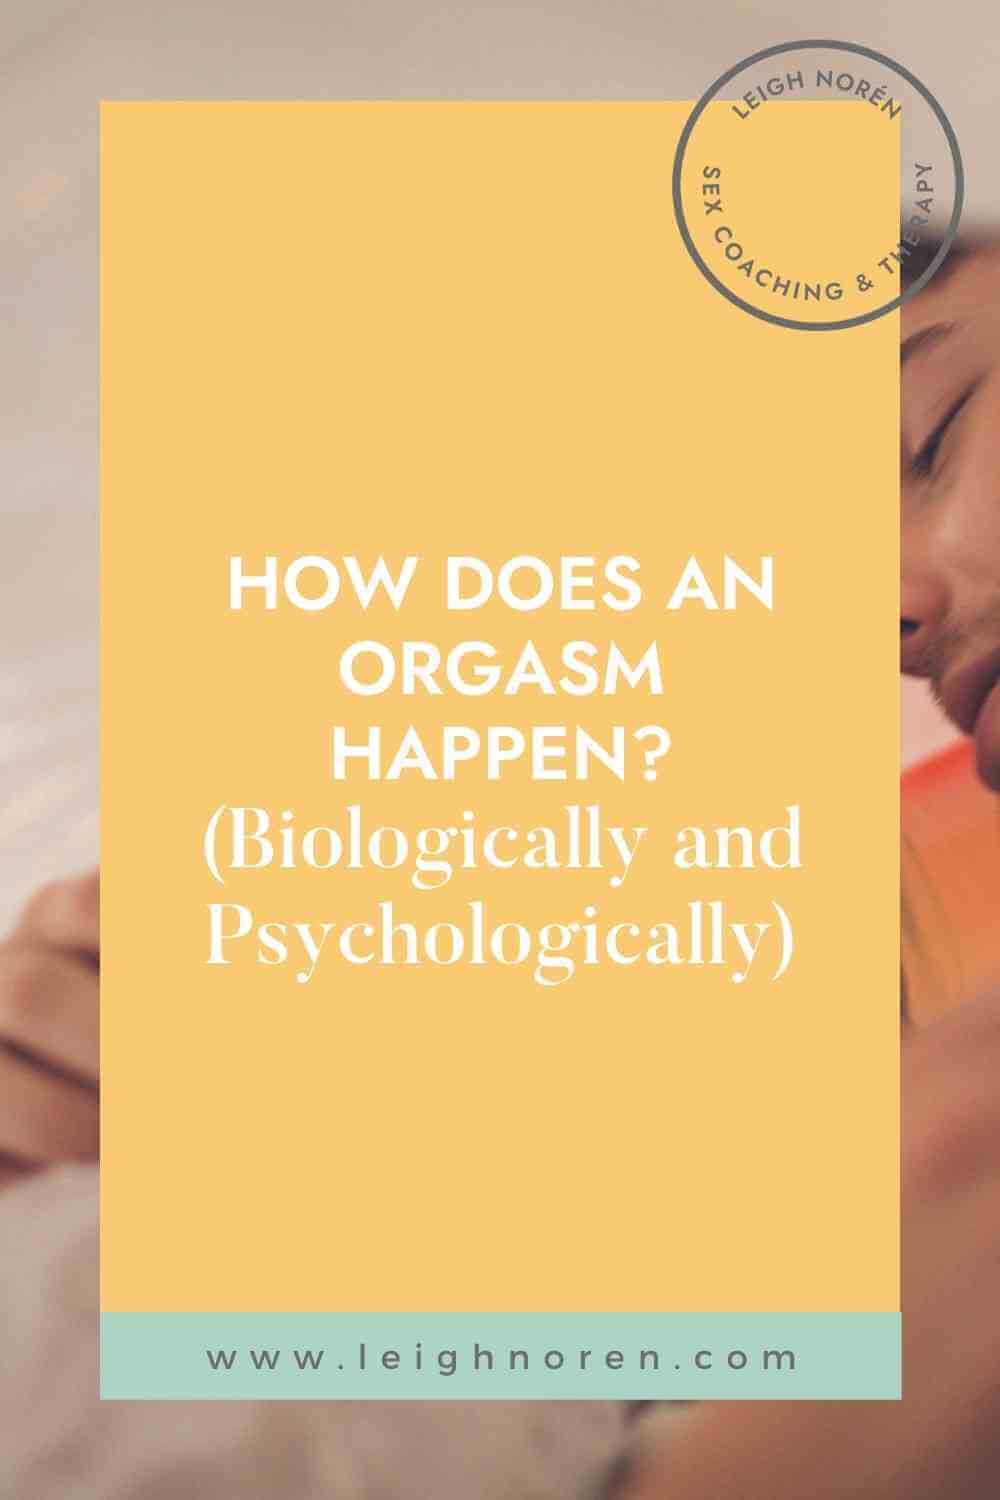 How does an orgasm happen biologically and psychologically